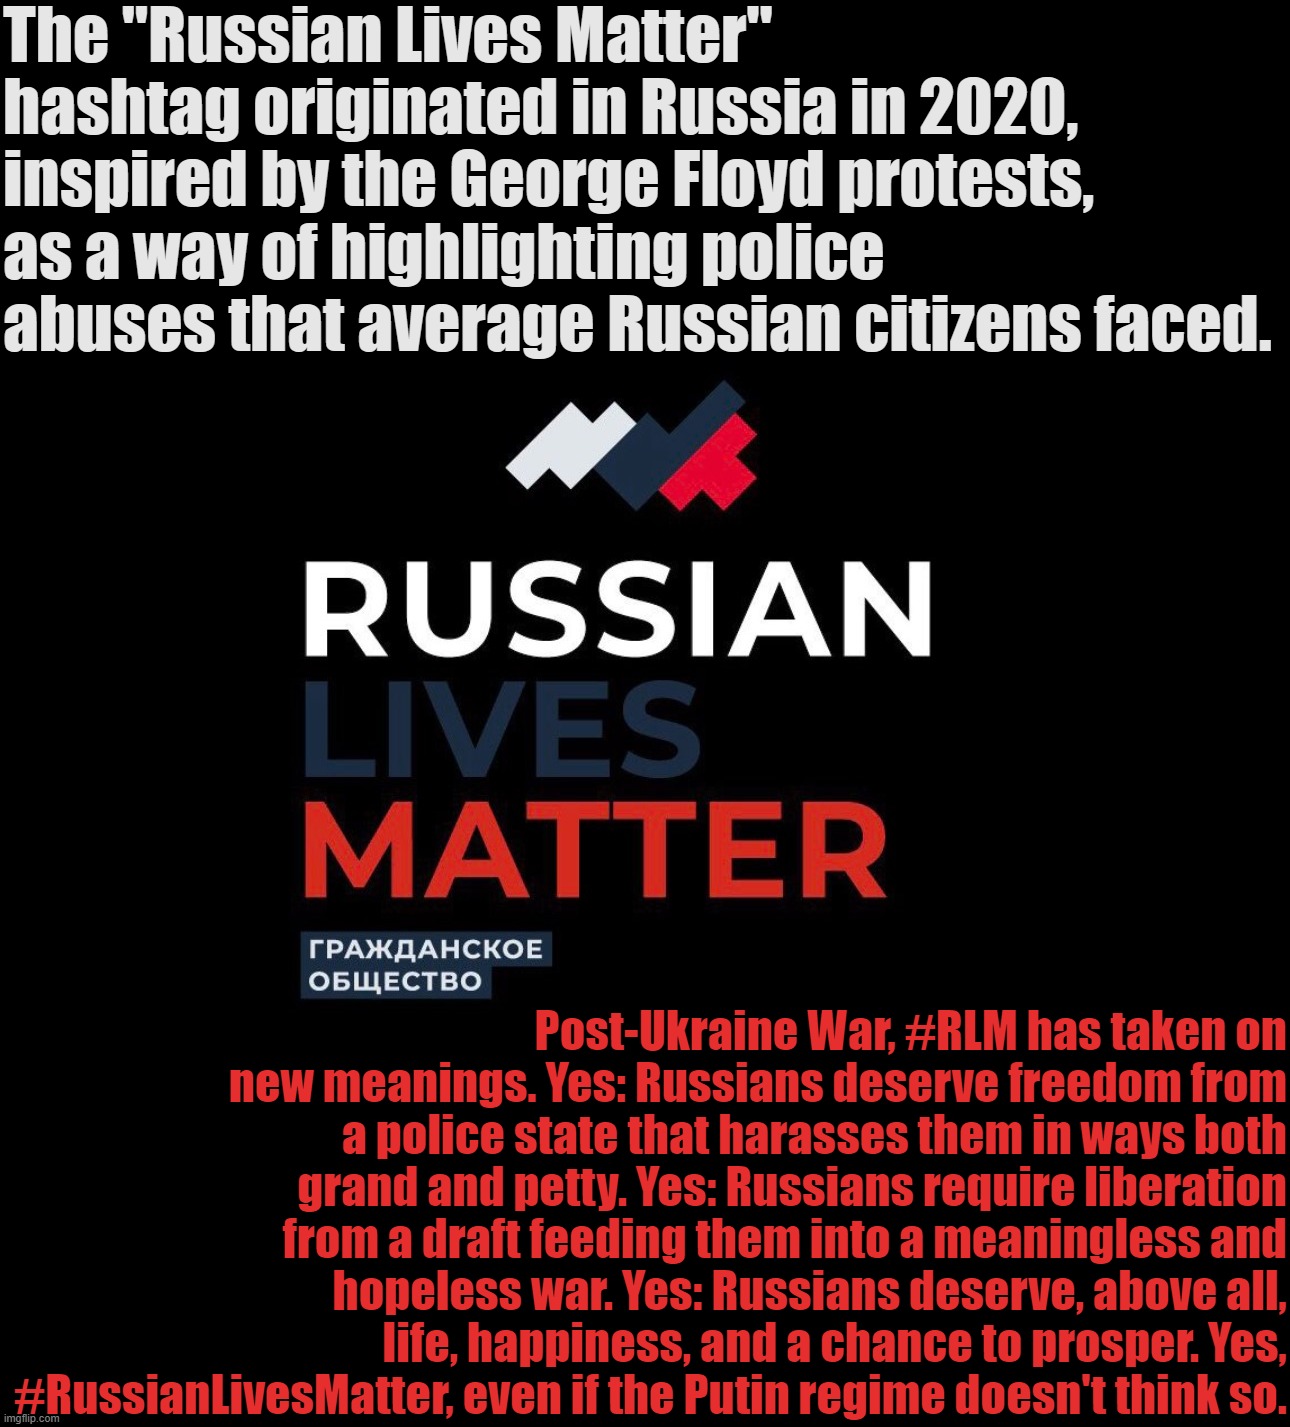 History and evolution of Russian Lives Matter. | The "Russian Lives Matter" hashtag originated in Russia in 2020, inspired by the George Floyd protests, as a way of highlighting police abuses that average Russian citizens faced. Post-Ukraine War, #RLM has taken on new meanings. Yes: Russians deserve freedom from a police state that harasses them in ways both grand and petty. Yes: Russians require liberation from a draft feeding them into a meaningless and hopeless war. Yes: Russians deserve, above all, life, happiness, and a chance to prosper. Yes, #RussianLivesMatter, even if the Putin regime doesn't think so. | image tagged in russian lives matter | made w/ Imgflip meme maker